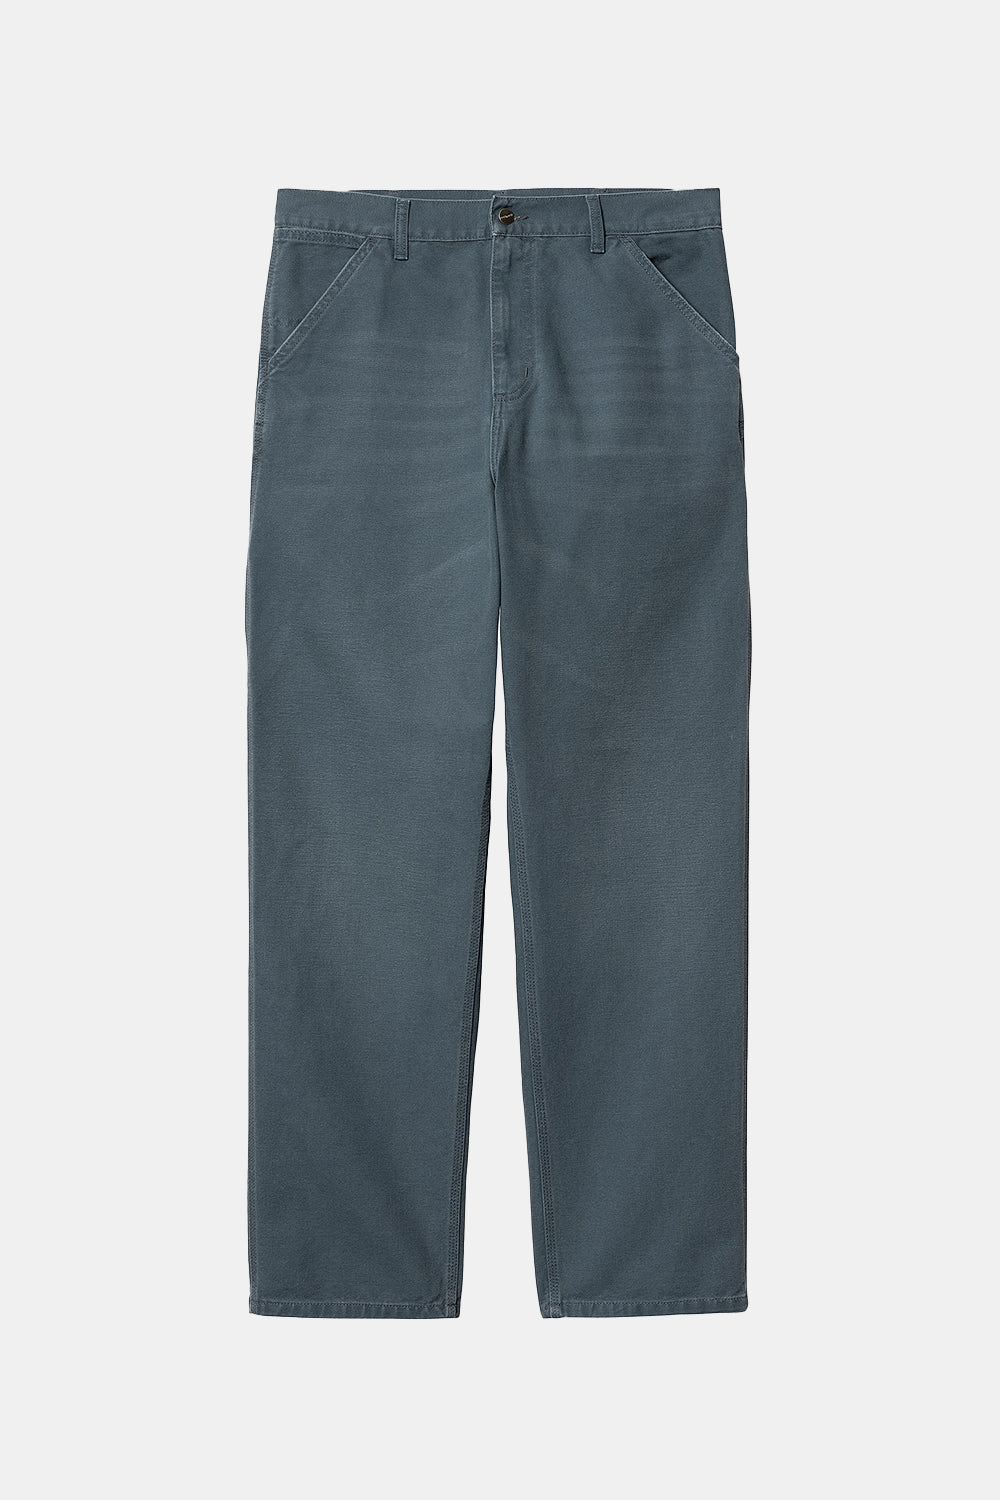 Carhartt WIP Single Knee Pant (Ore Aged Canvas) | Number Six